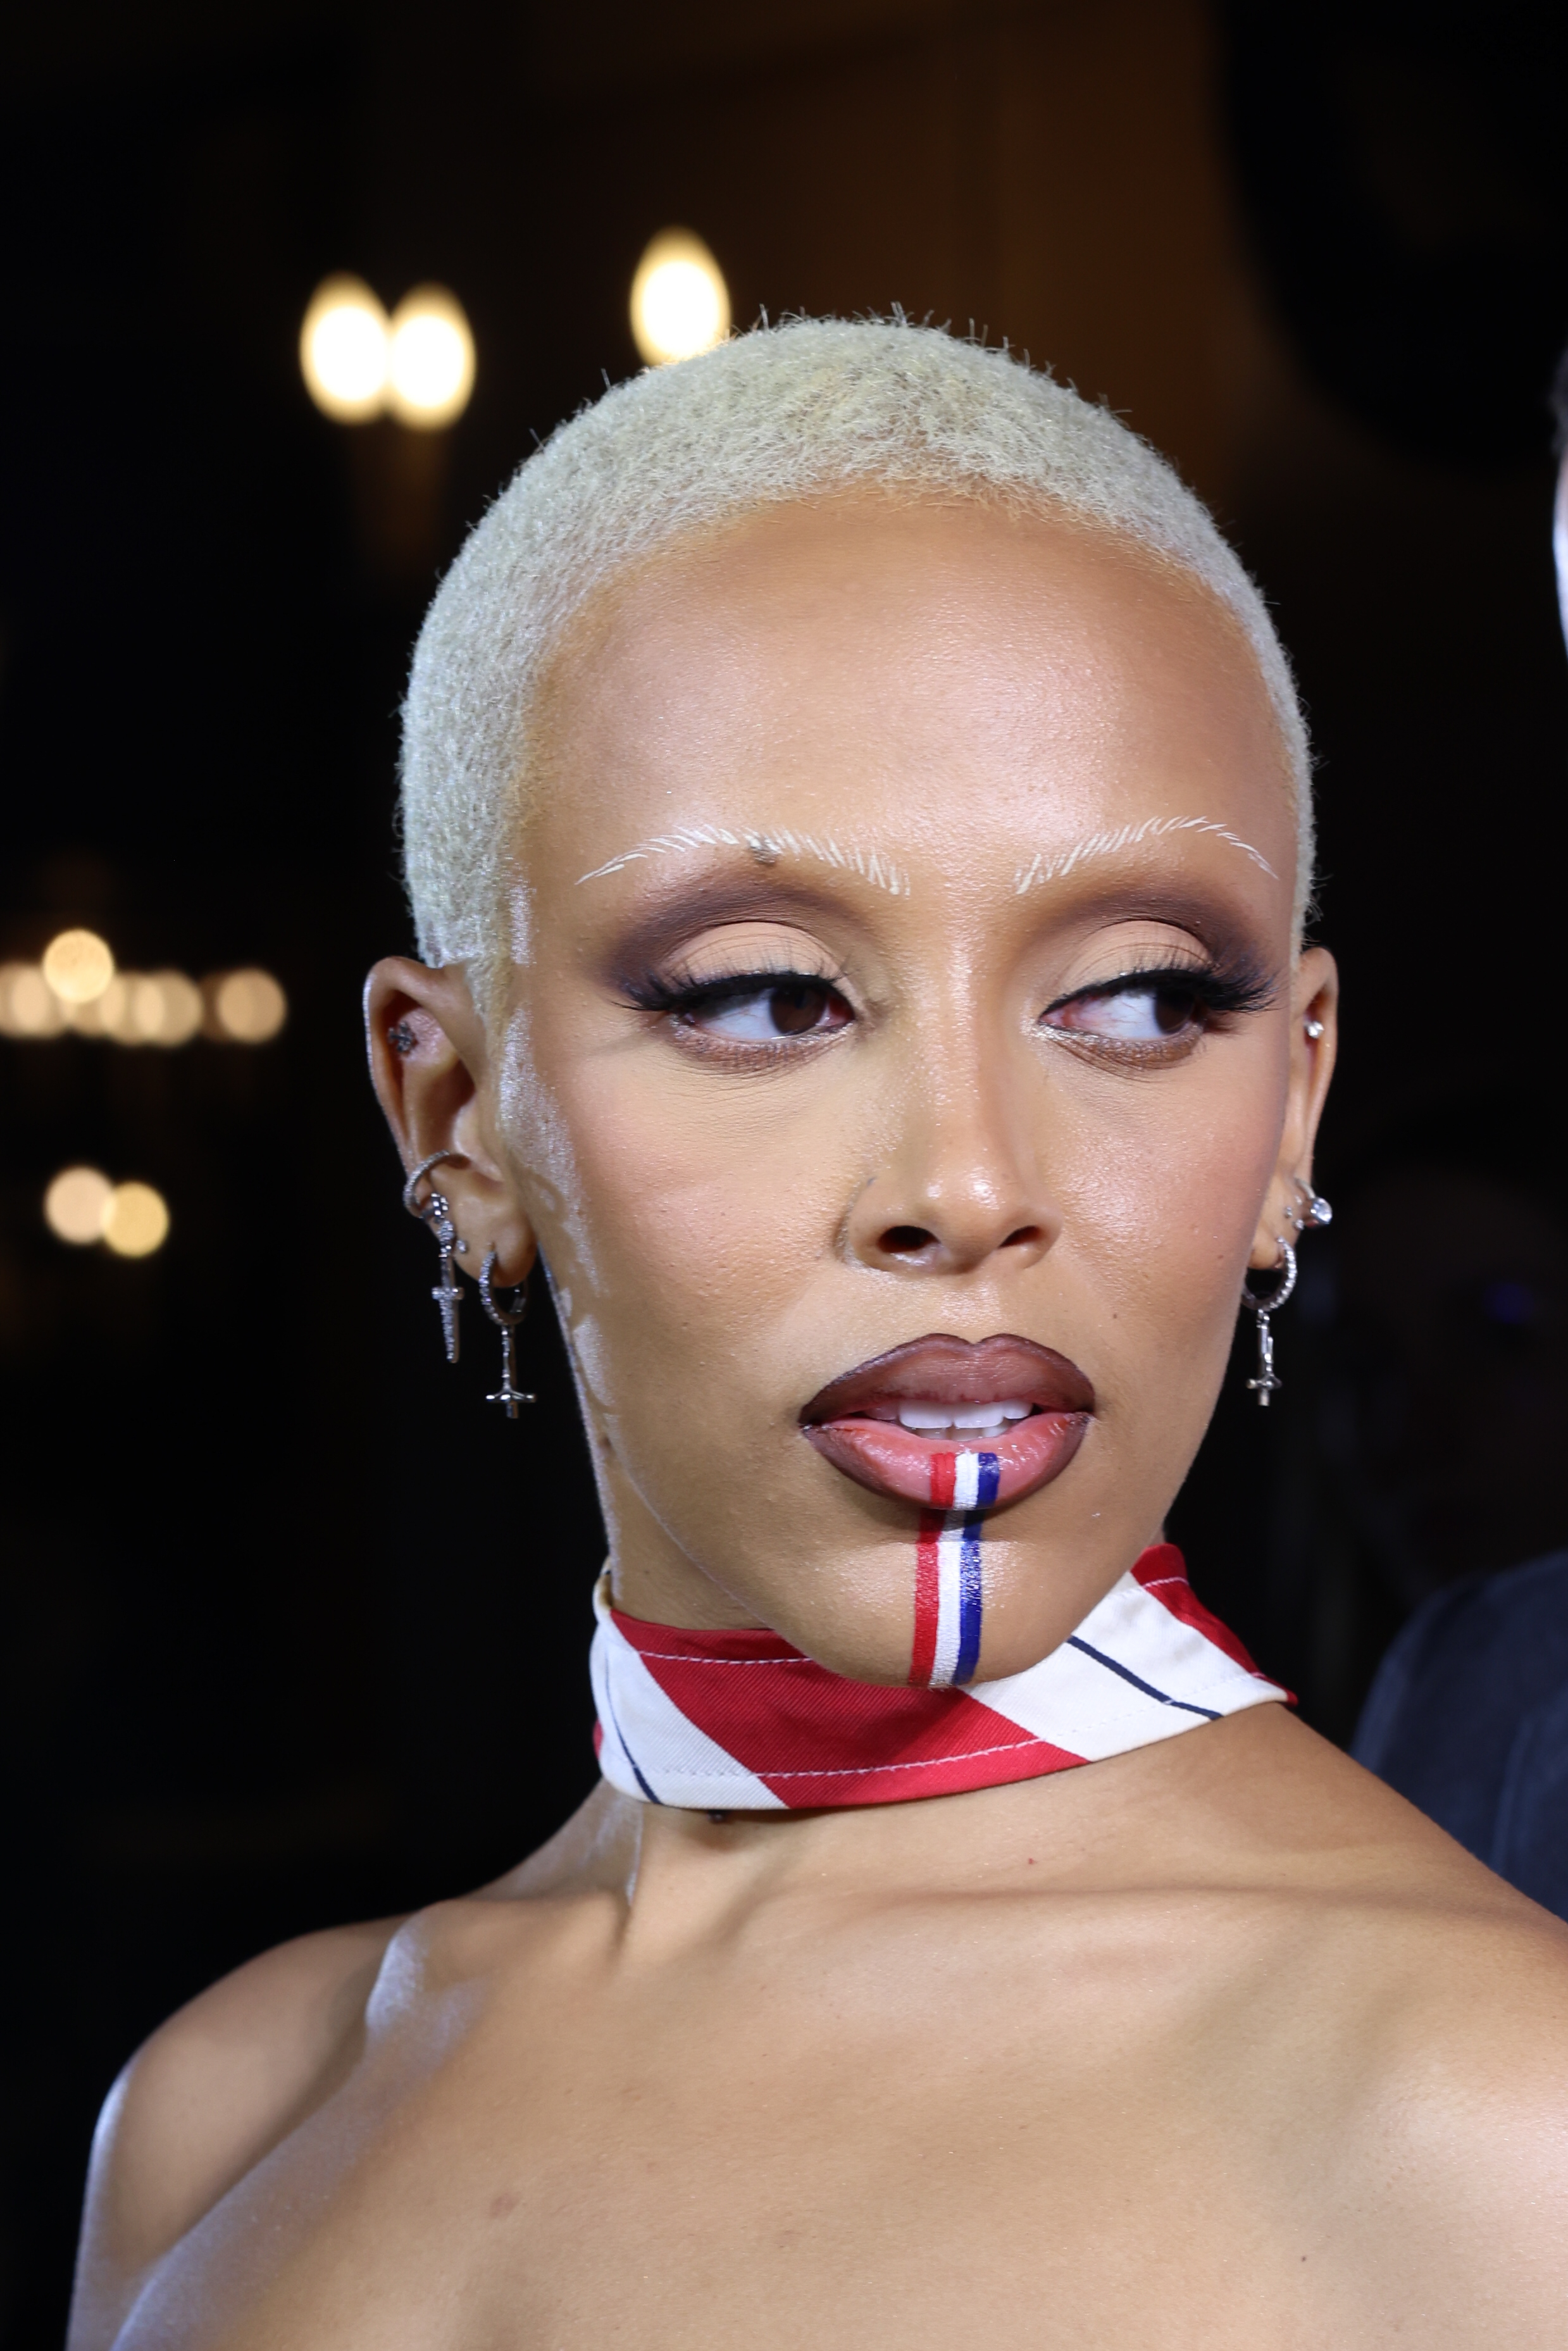 A close-up of Doja wearing a choker and red, white, and blue lip and chin makeup stripes